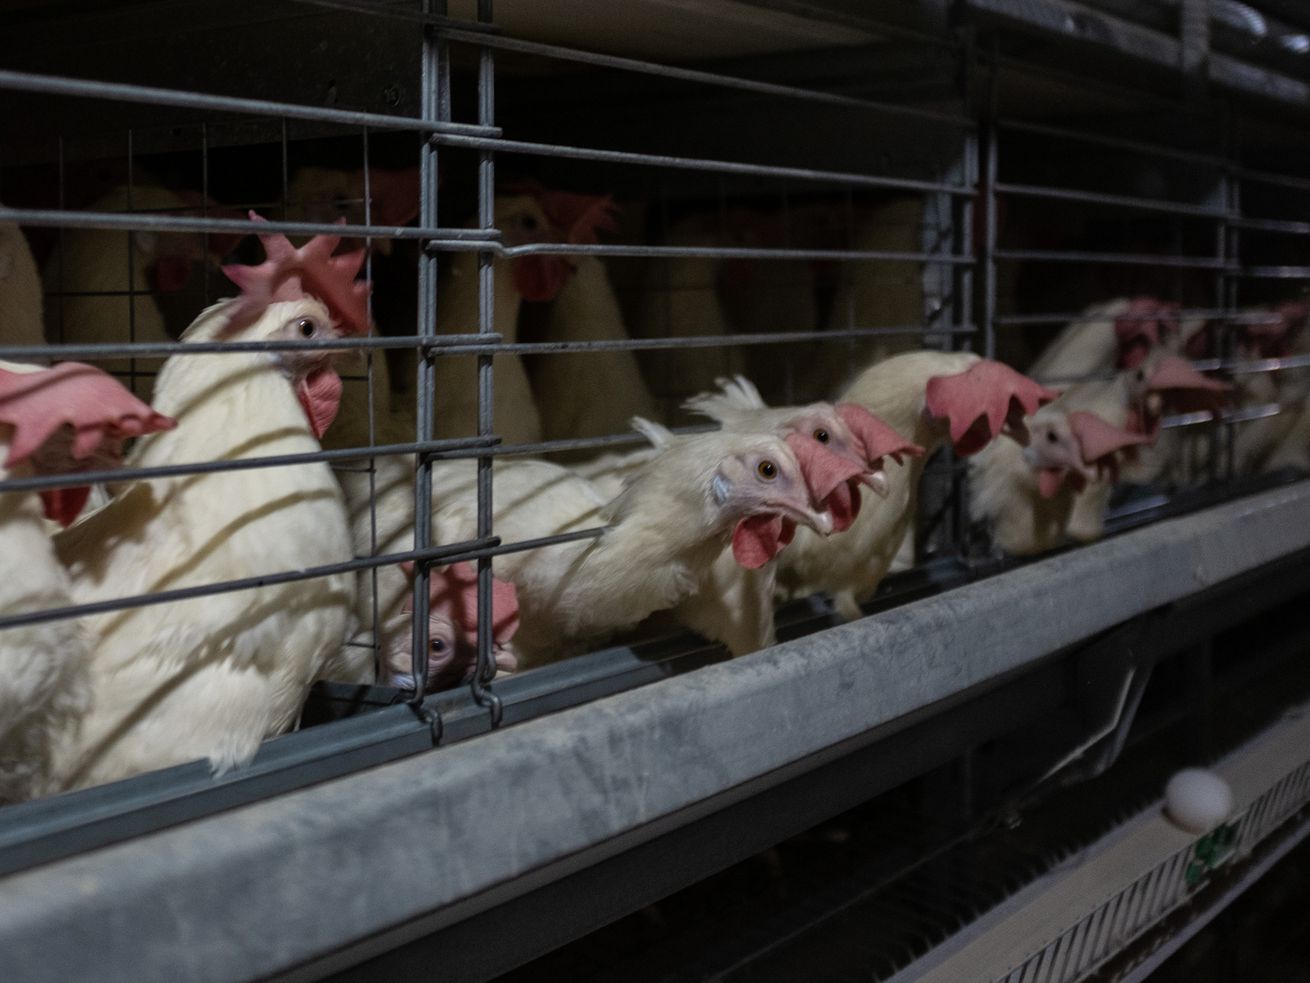 Hens are seen poking their heads out of the bars of battery cages.